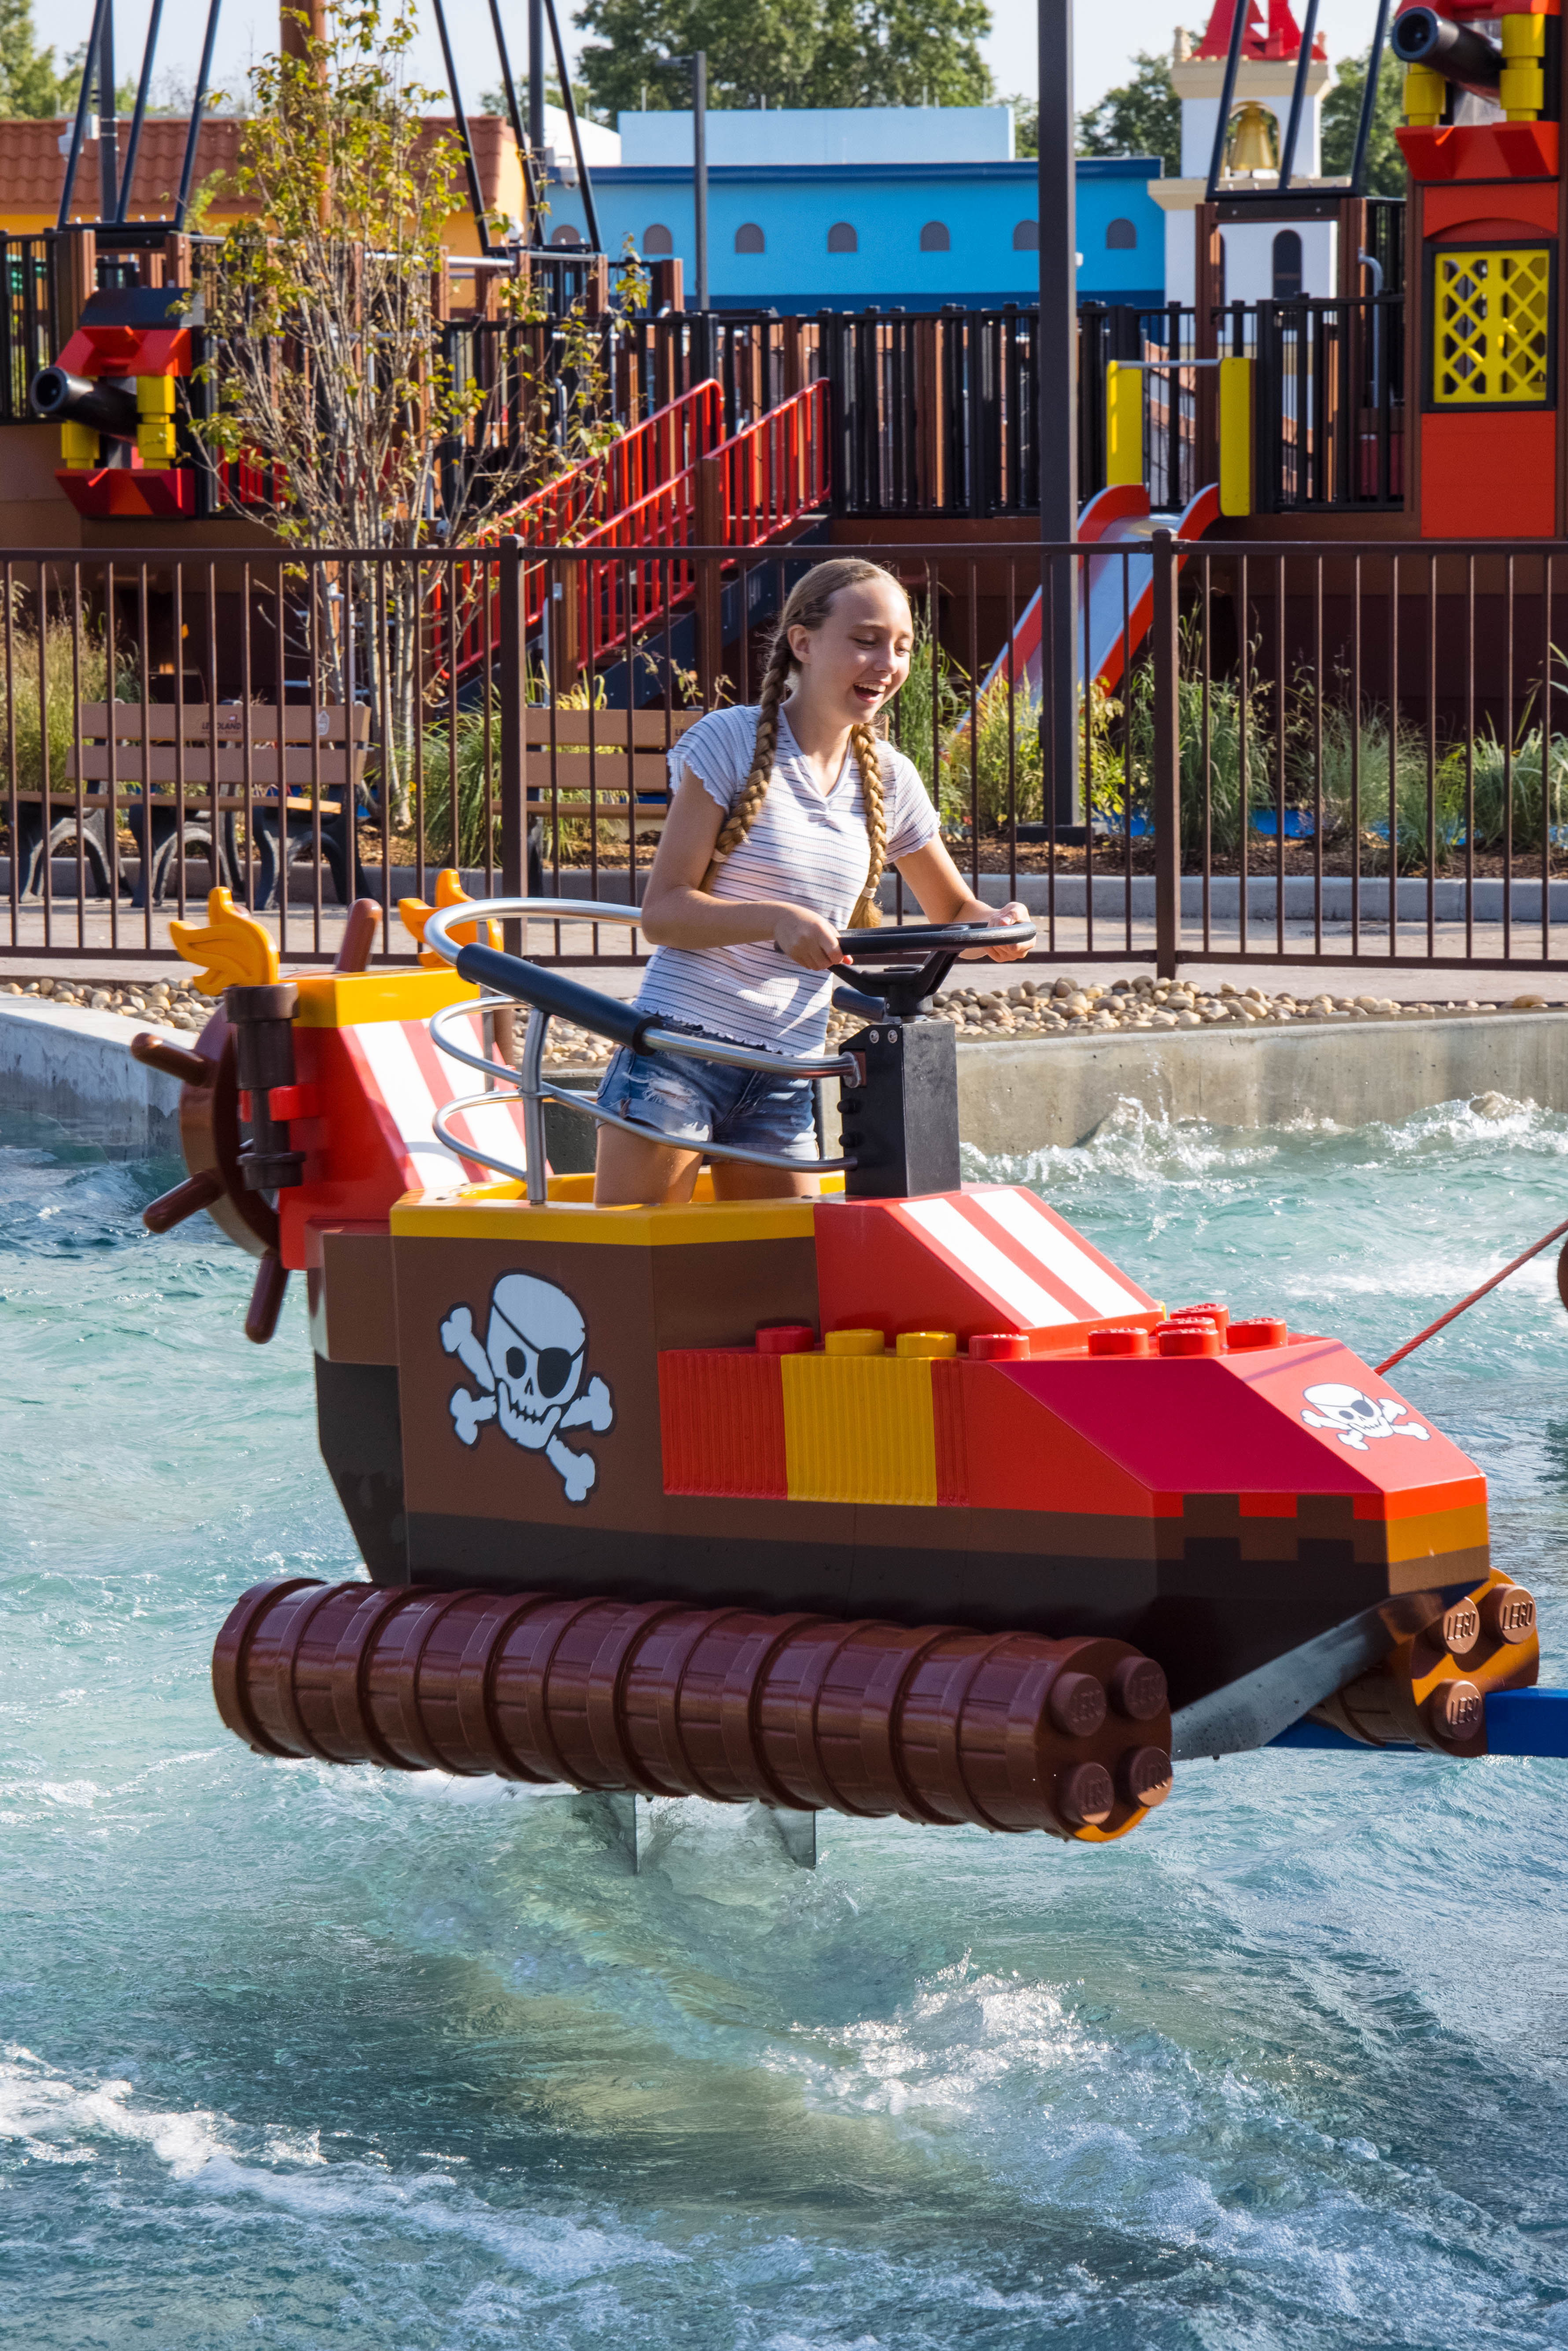 Cool off and sail the high seas on Rouge Riders at LEGOLAND New York